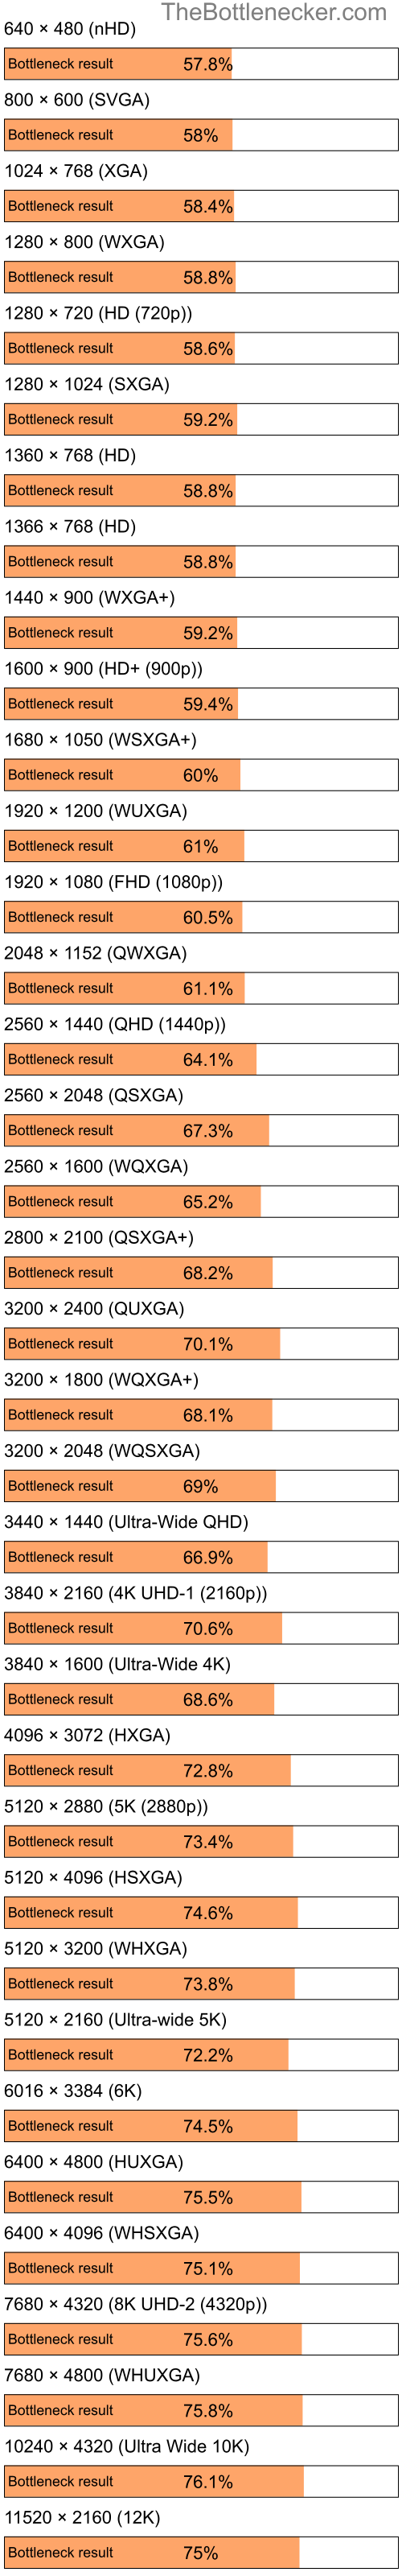 Bottleneck results by resolution for Intel Pentium 4 and NVIDIA GeForce 8100 in Processor Intense Tasks